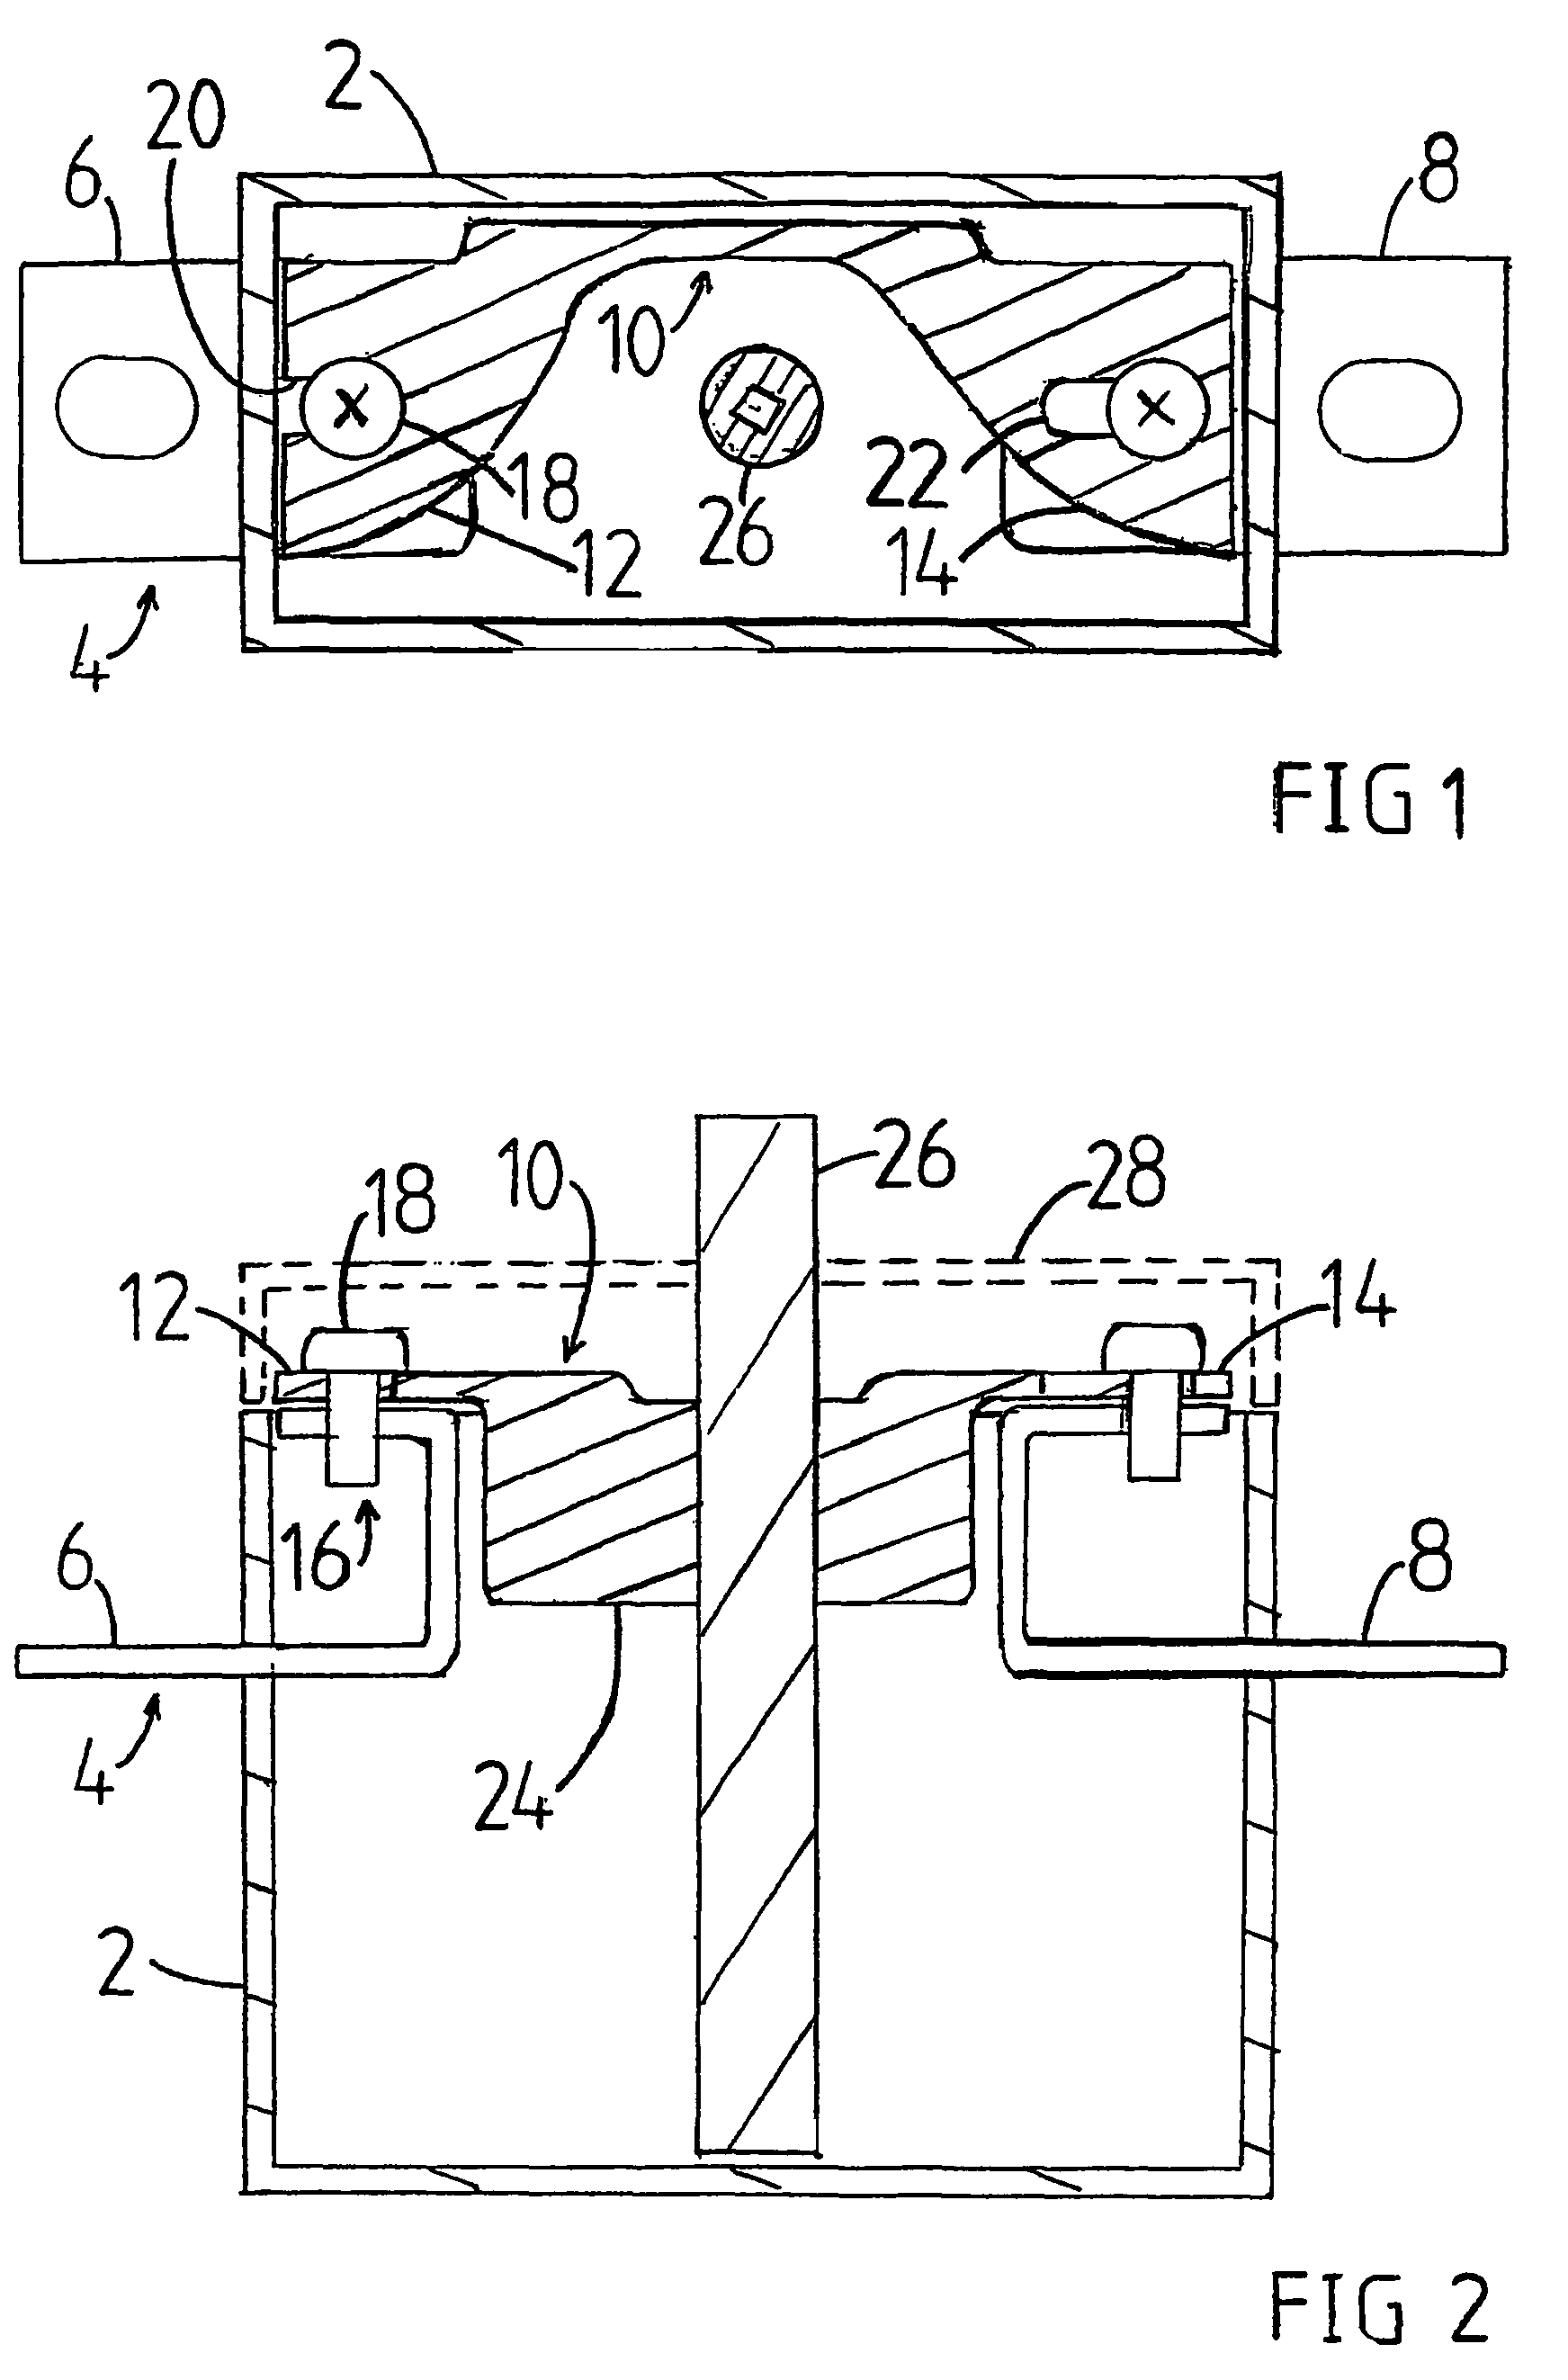 Switching device provided with neutral conductor